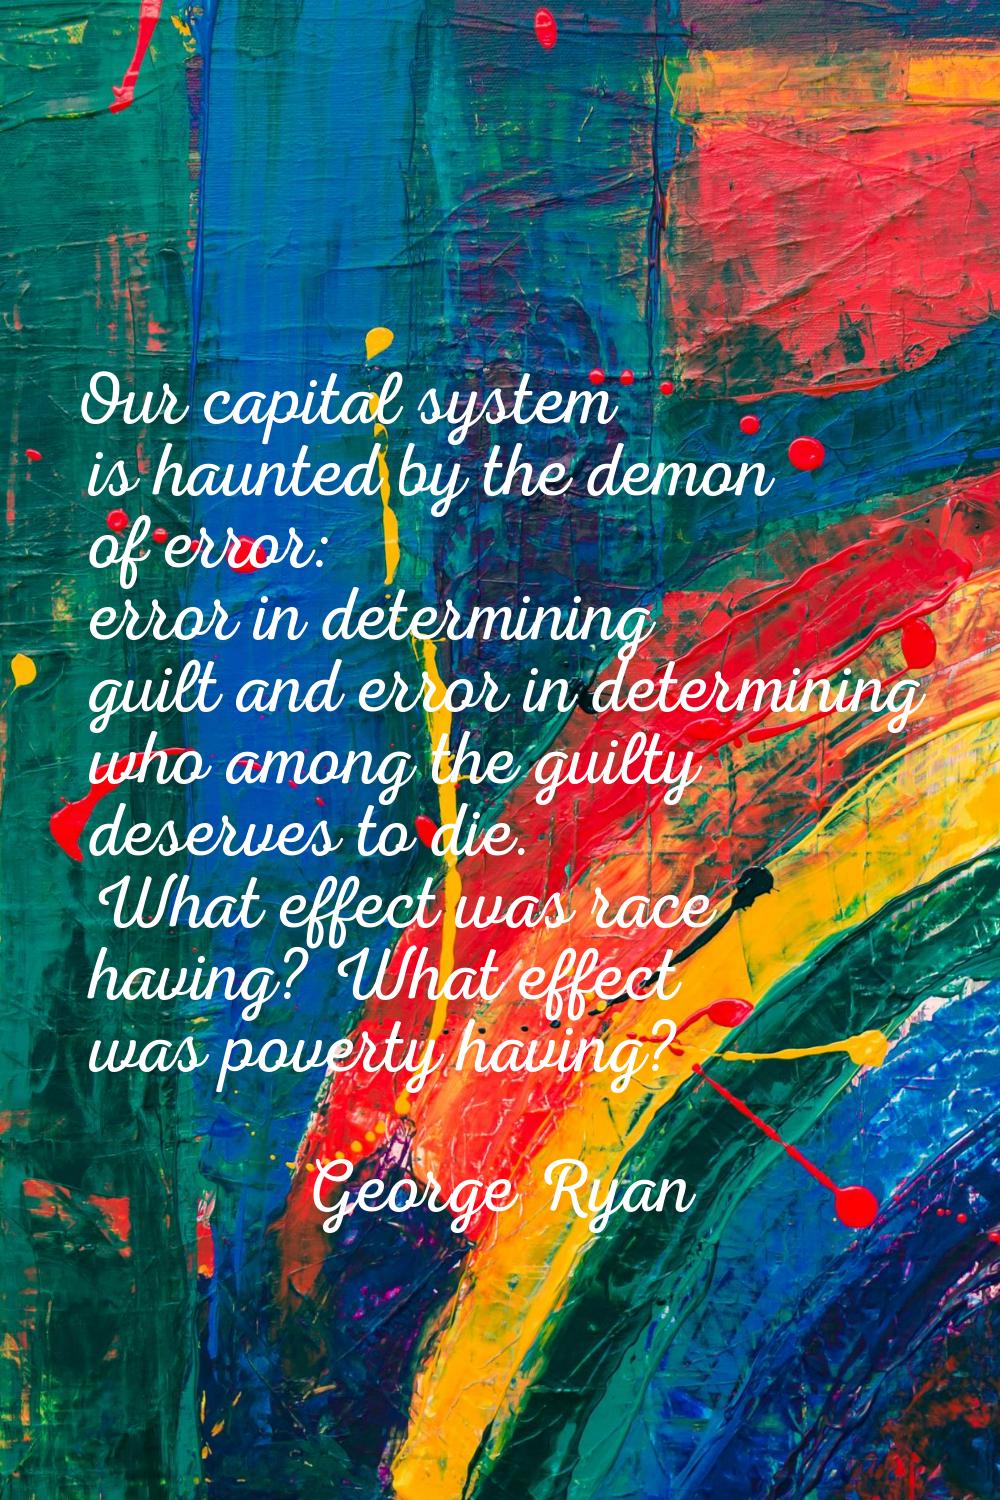 Our capital system is haunted by the demon of error: error in determining guilt and error in determ